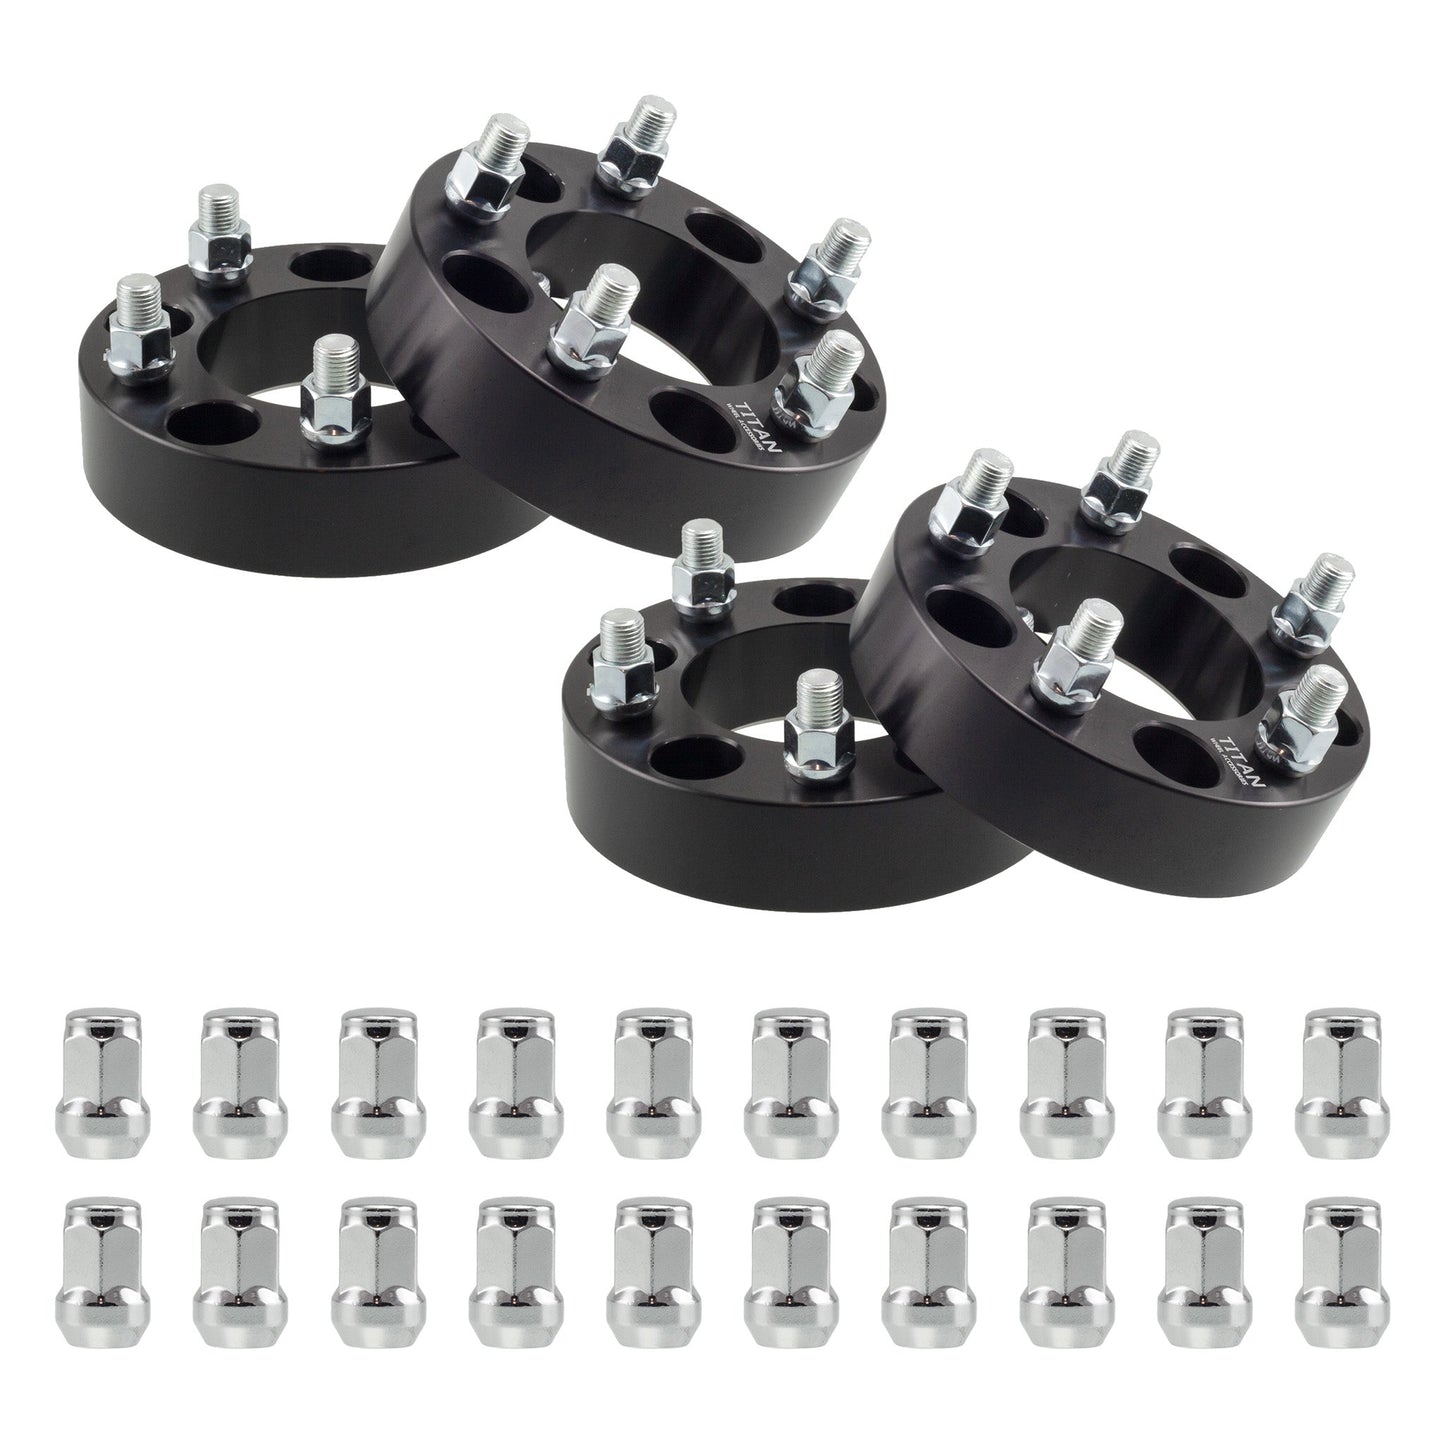 1.5" Titan Wheel Spacers for Dodge Charger Challenger Chrysler 300 | 5x4.5 | 71.5 Hubcentric | 14x1.5 Studs | Titan Wheel Accessories